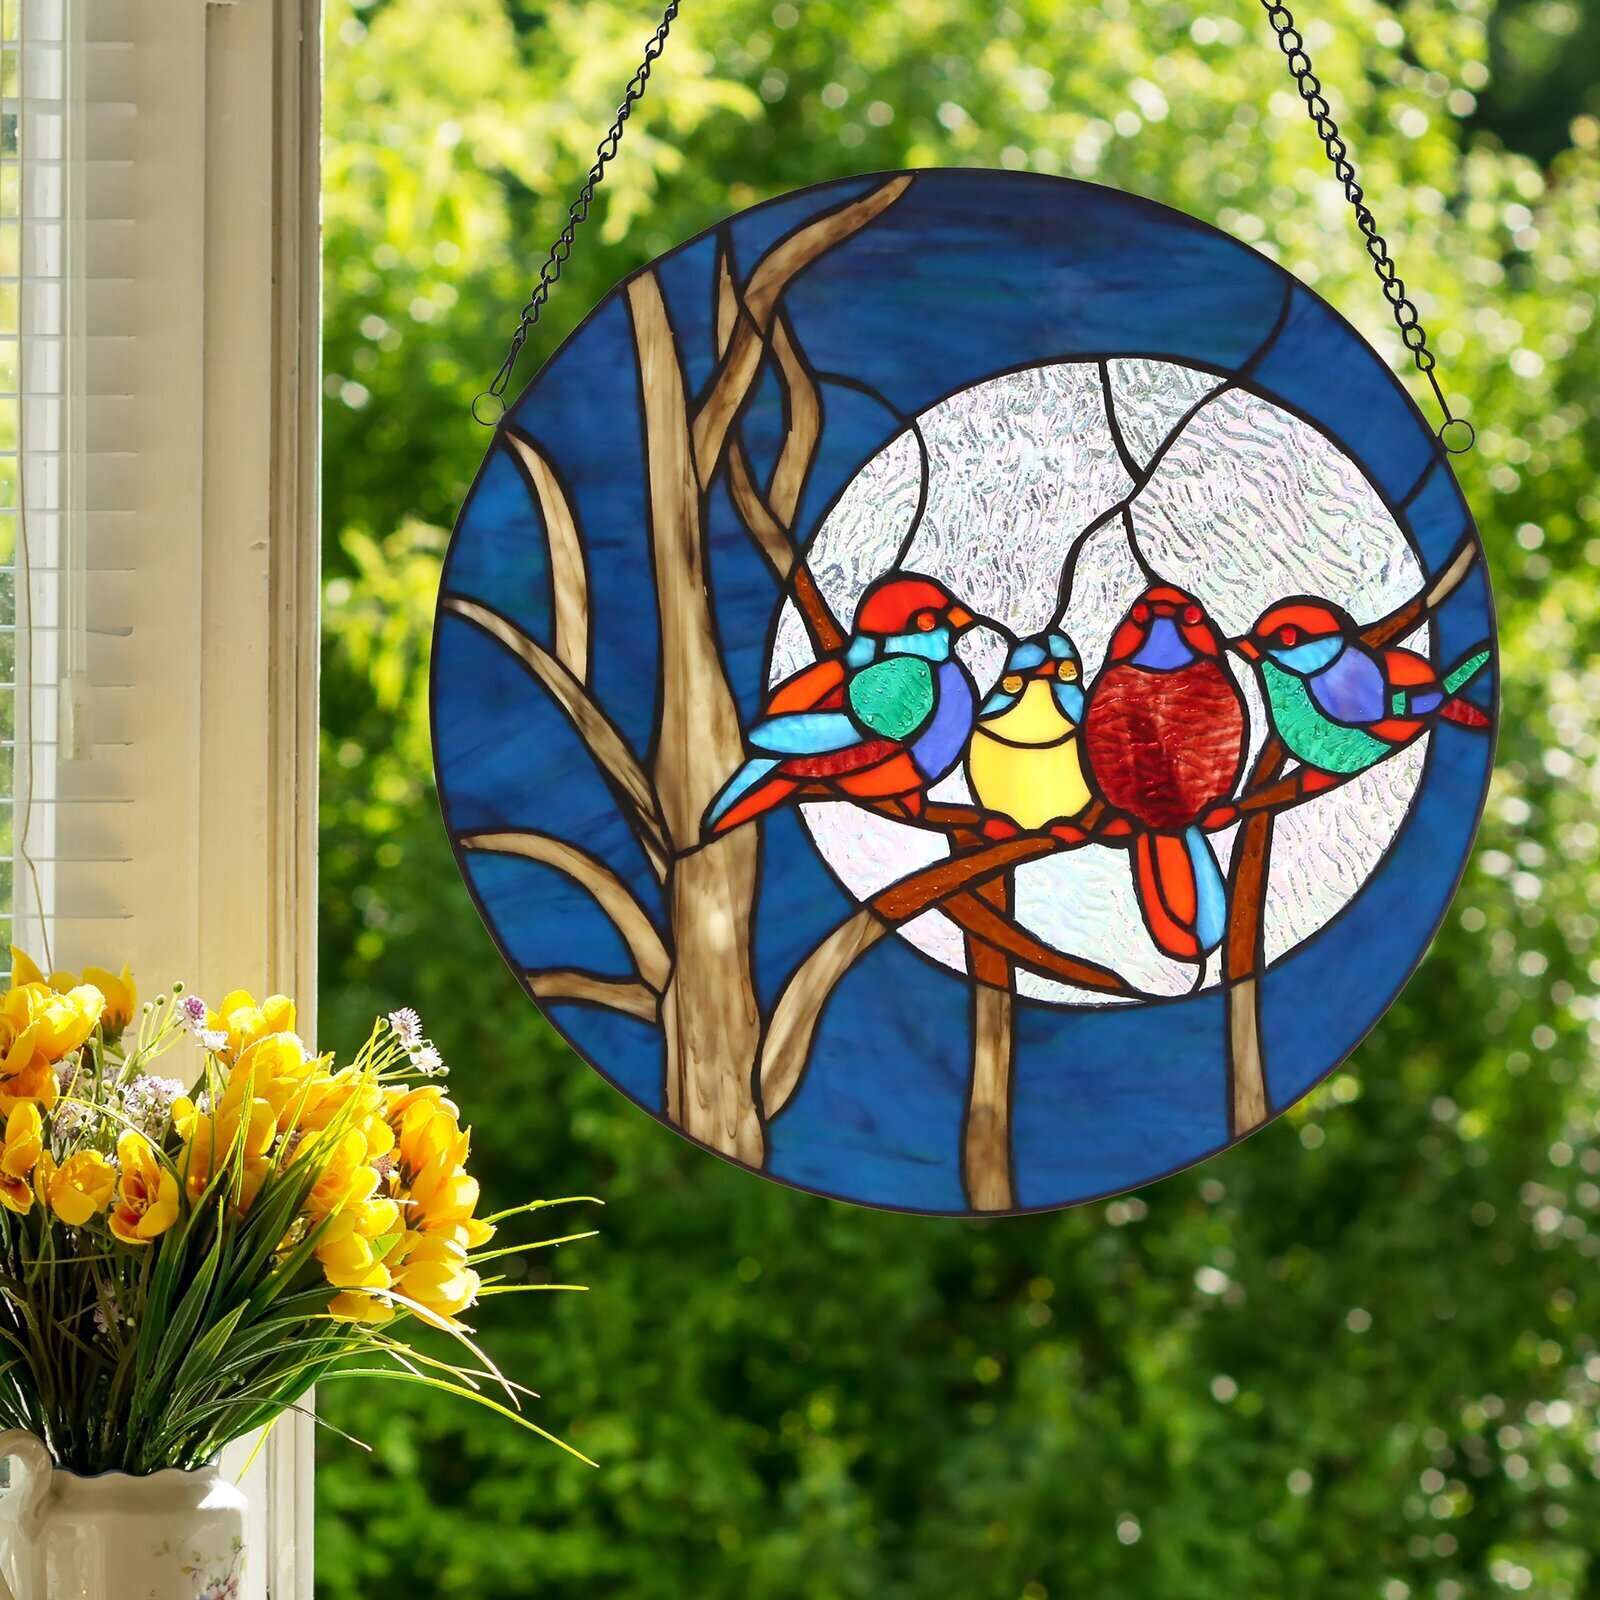 Bird series decorative hanging window hanging JKKJ Phoenix on wire high stained glass catcher window panel Stained glass bird catcher on window Gift for bird lovers 